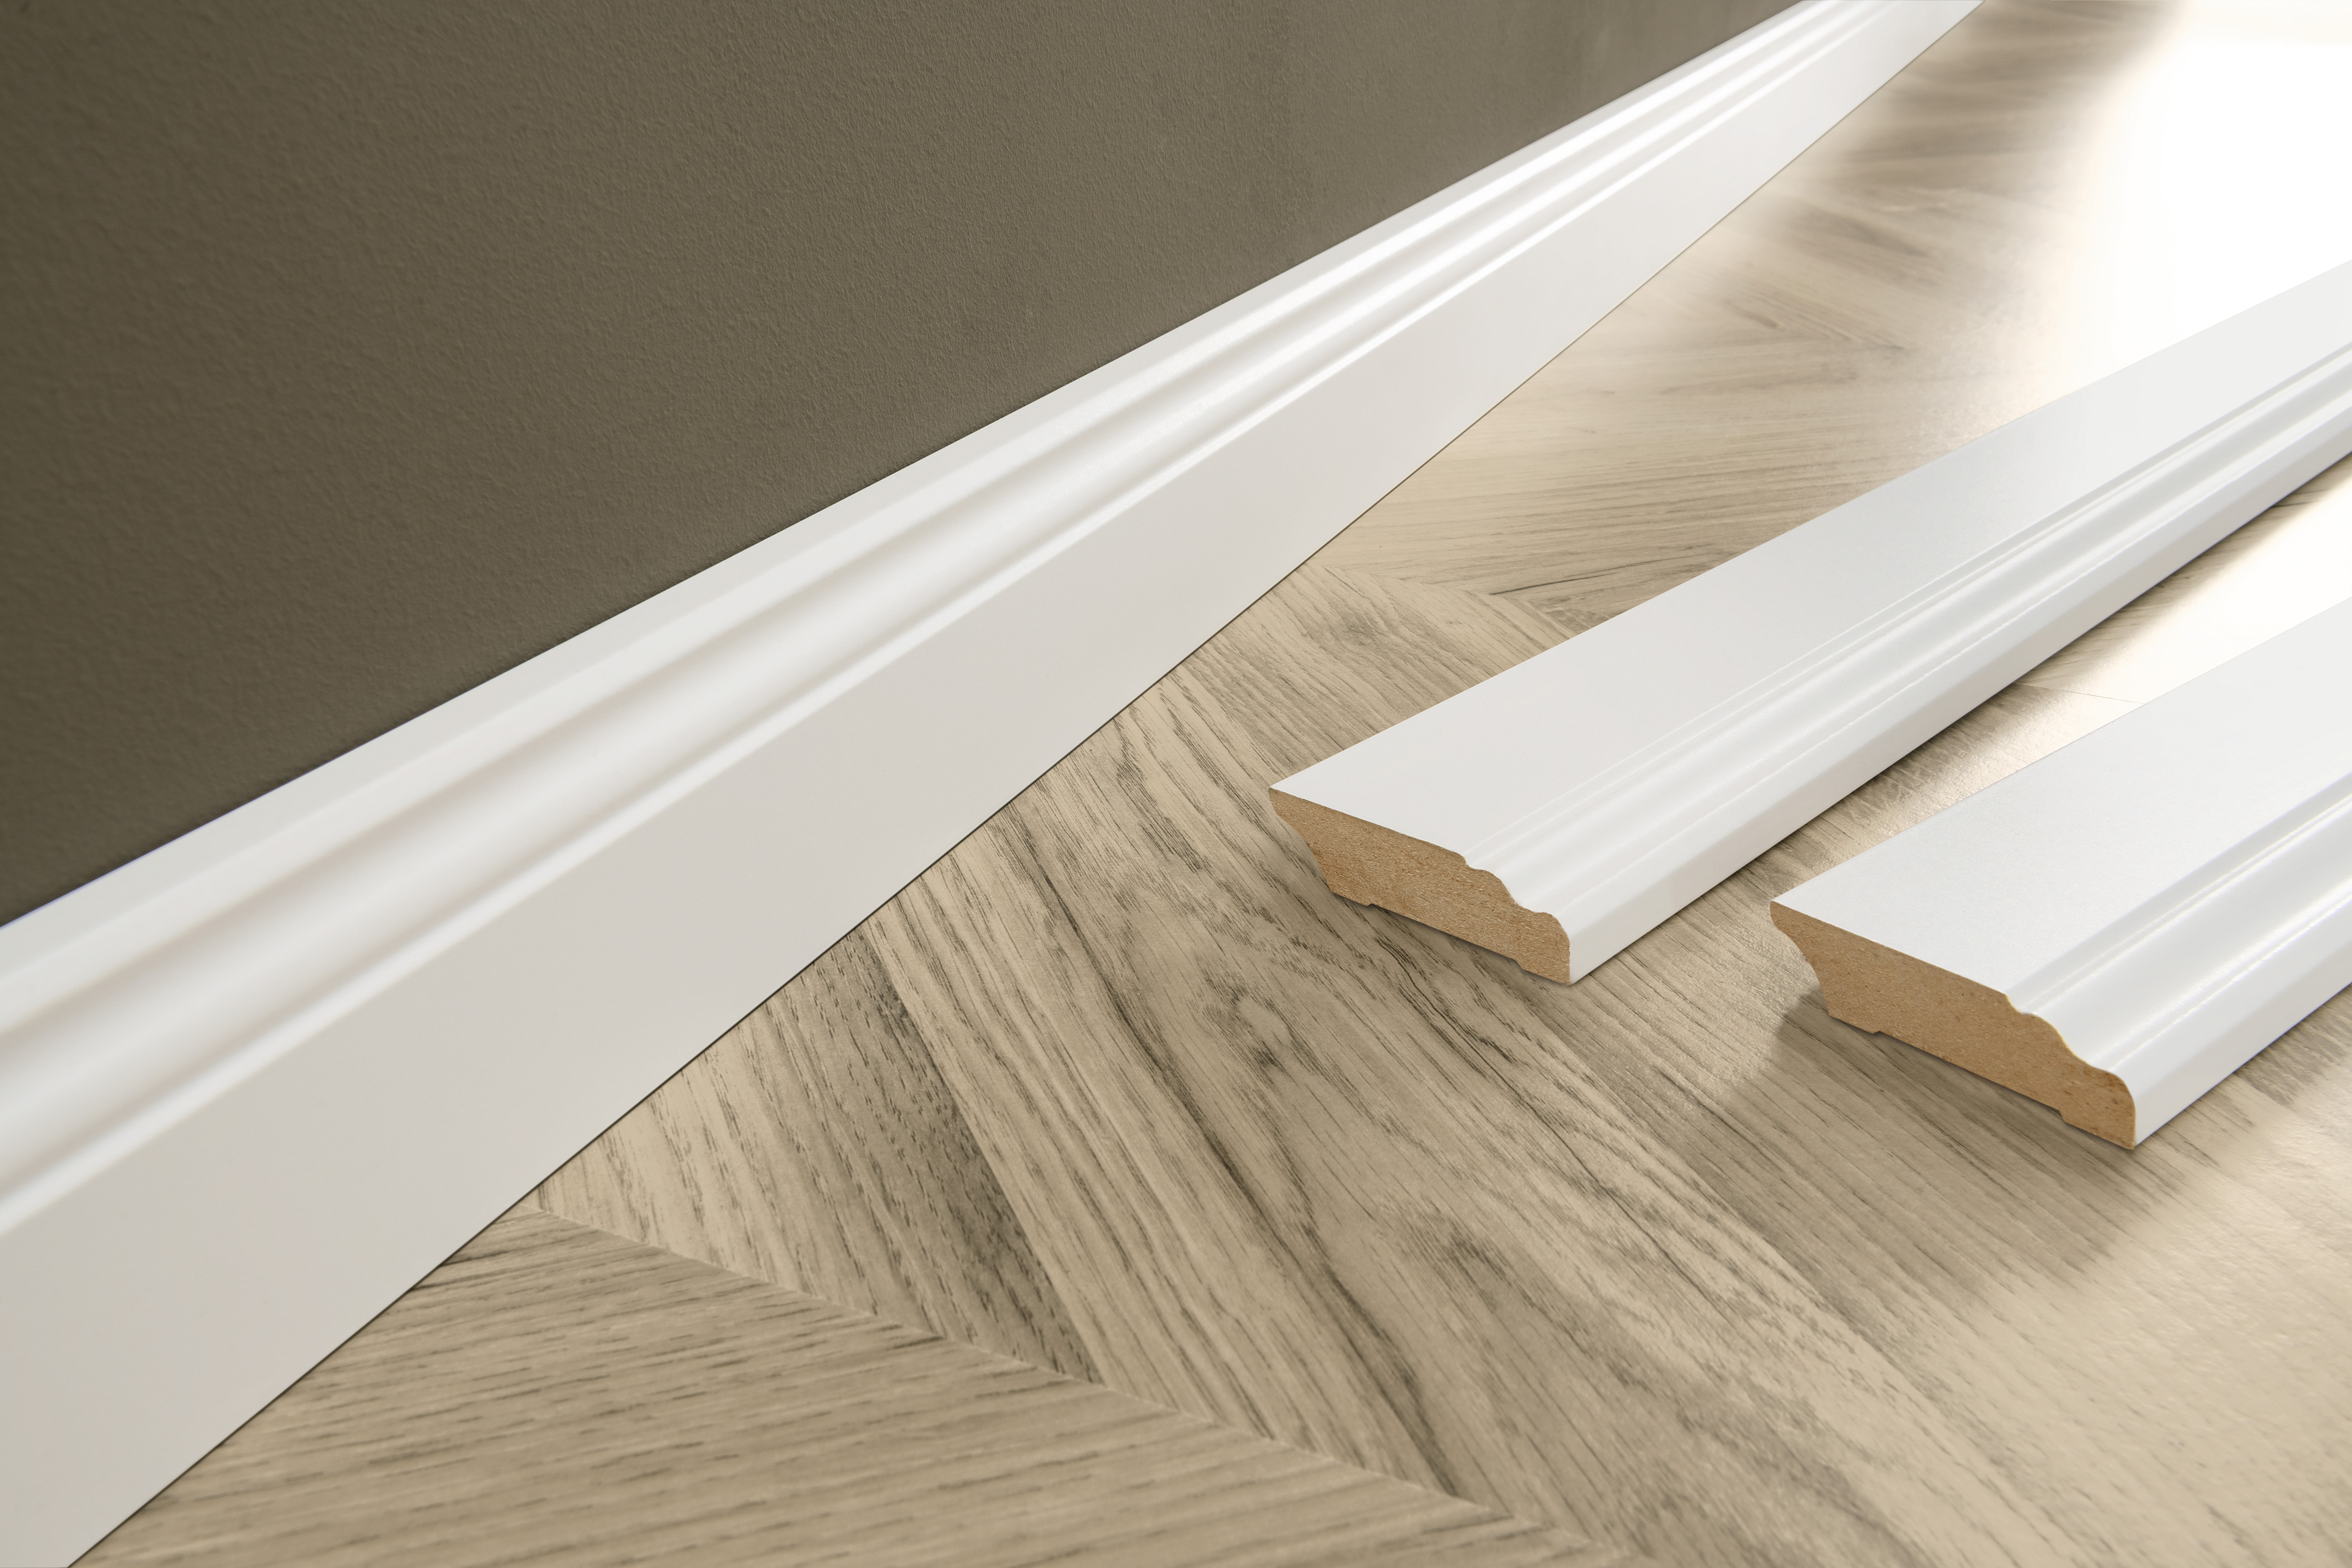 EGGER accessories for surccessfully installing floors